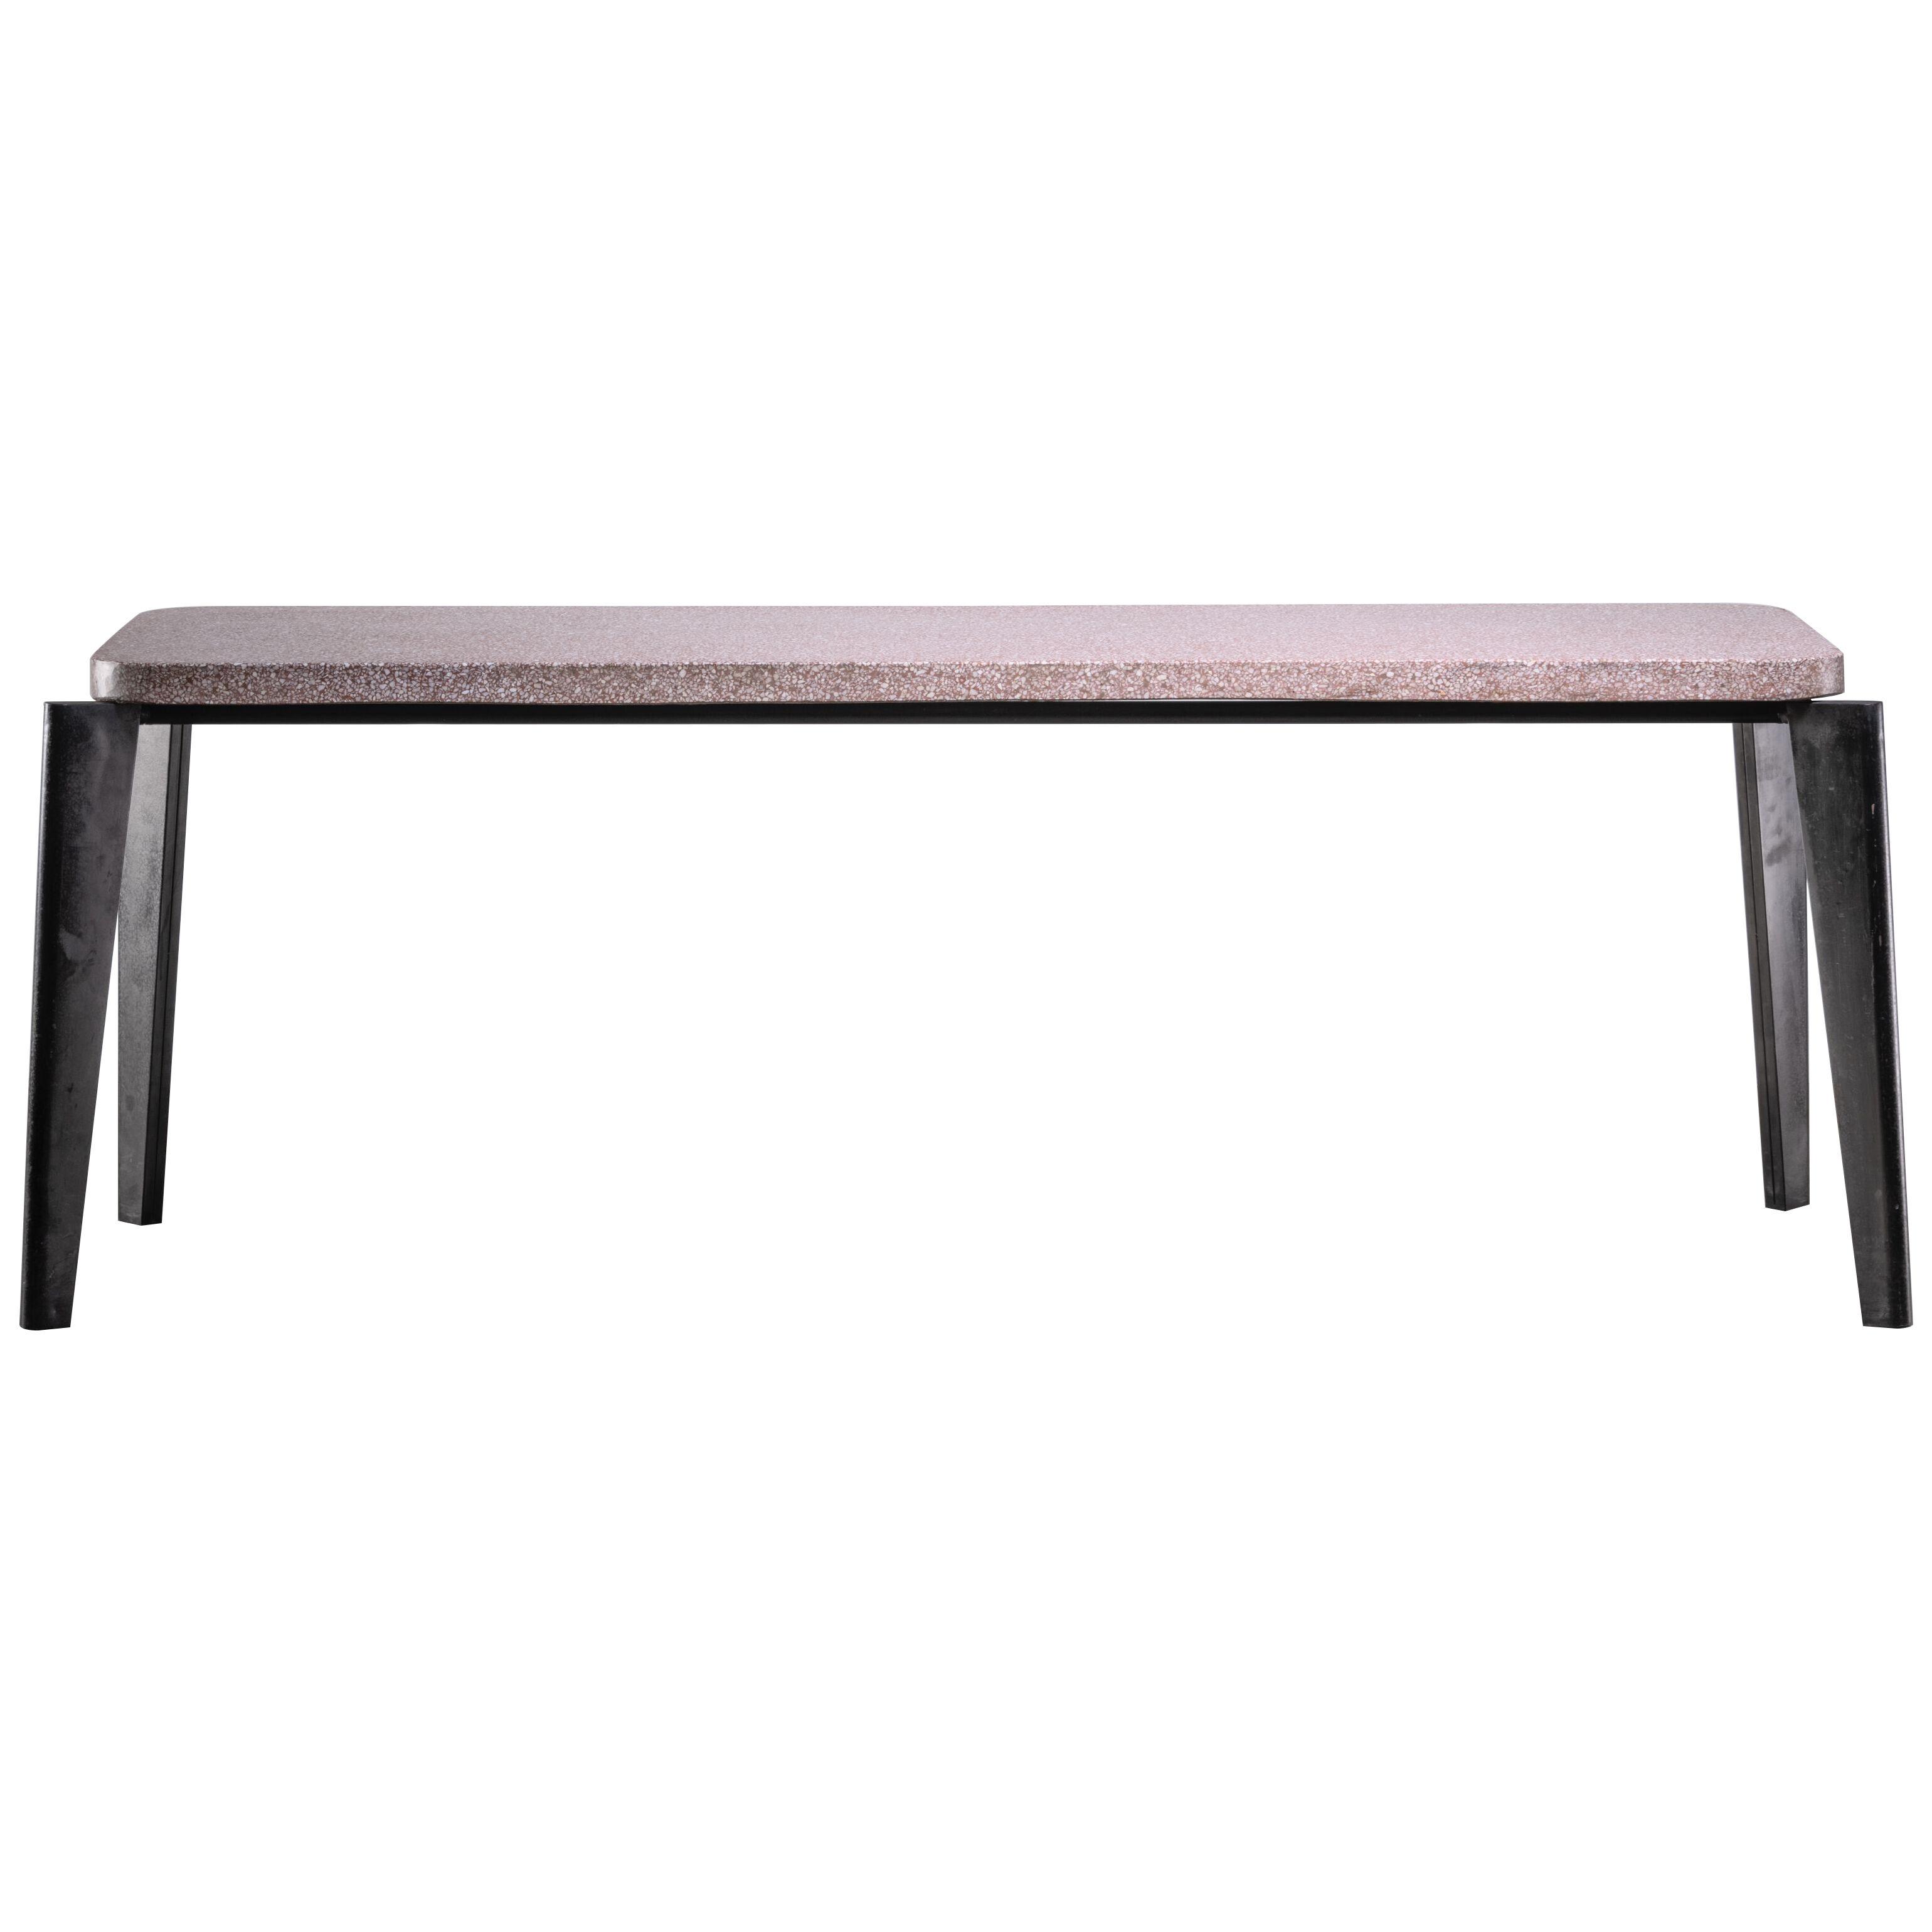 Jean Prouve model 504 or Flavigny dining table with granito top